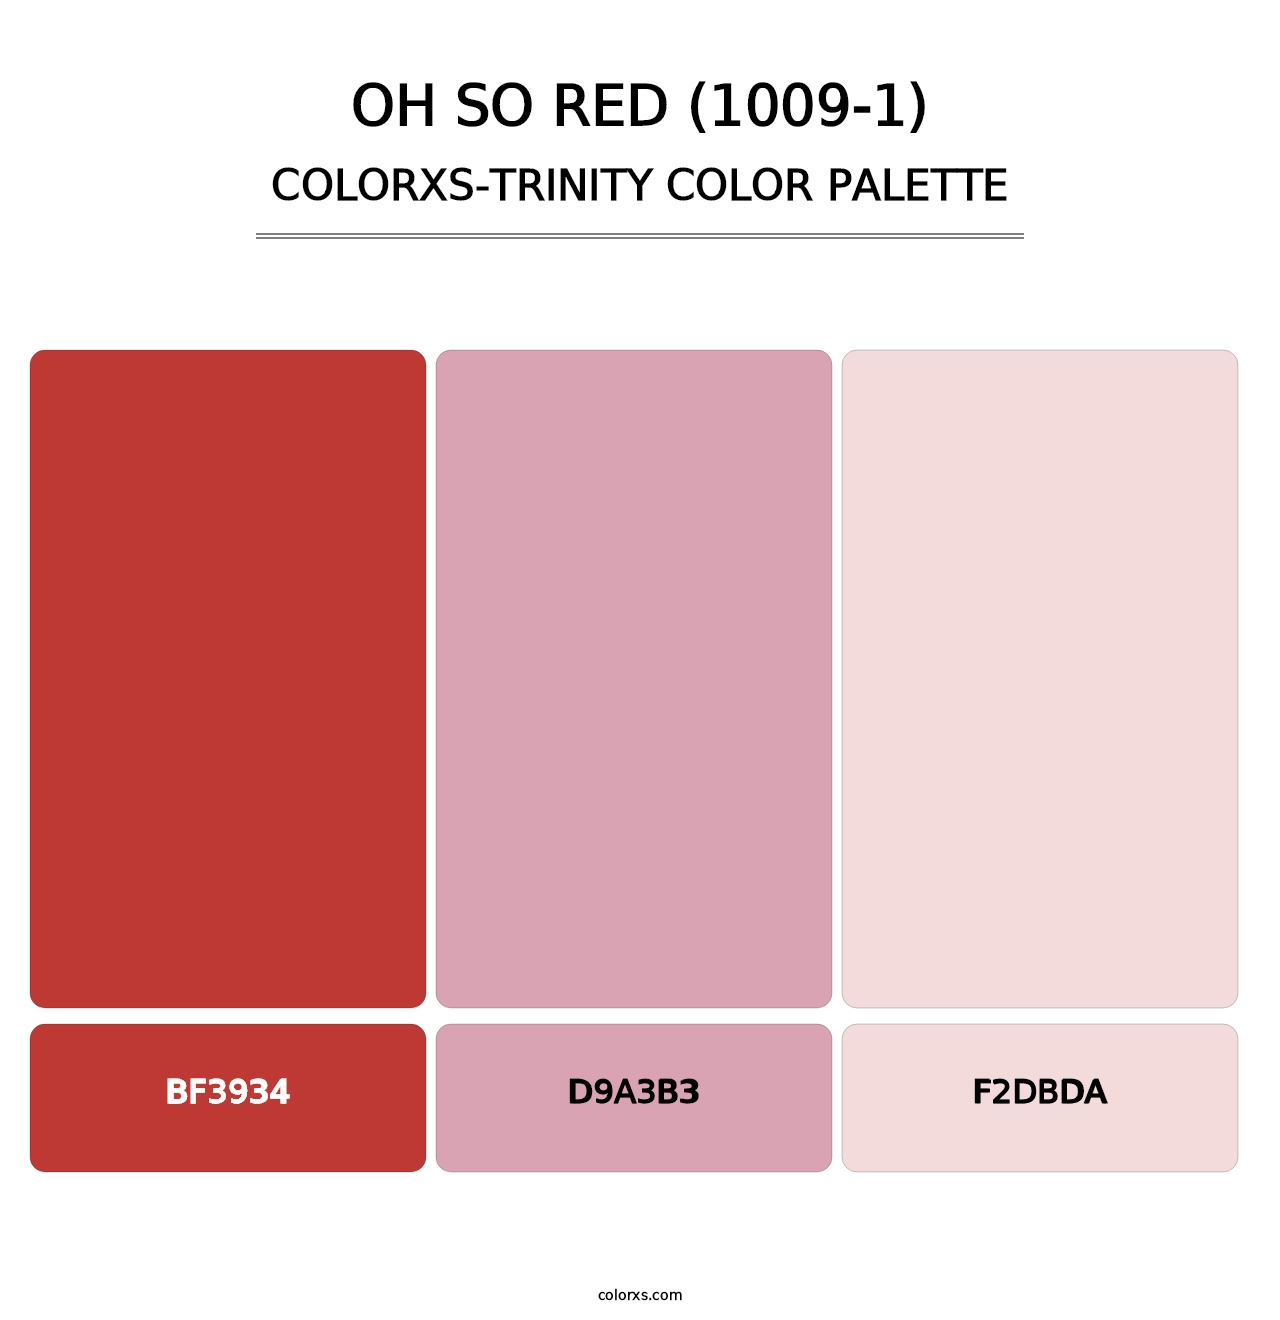 Oh So Red (1009-1) - Colorxs Trinity Palette